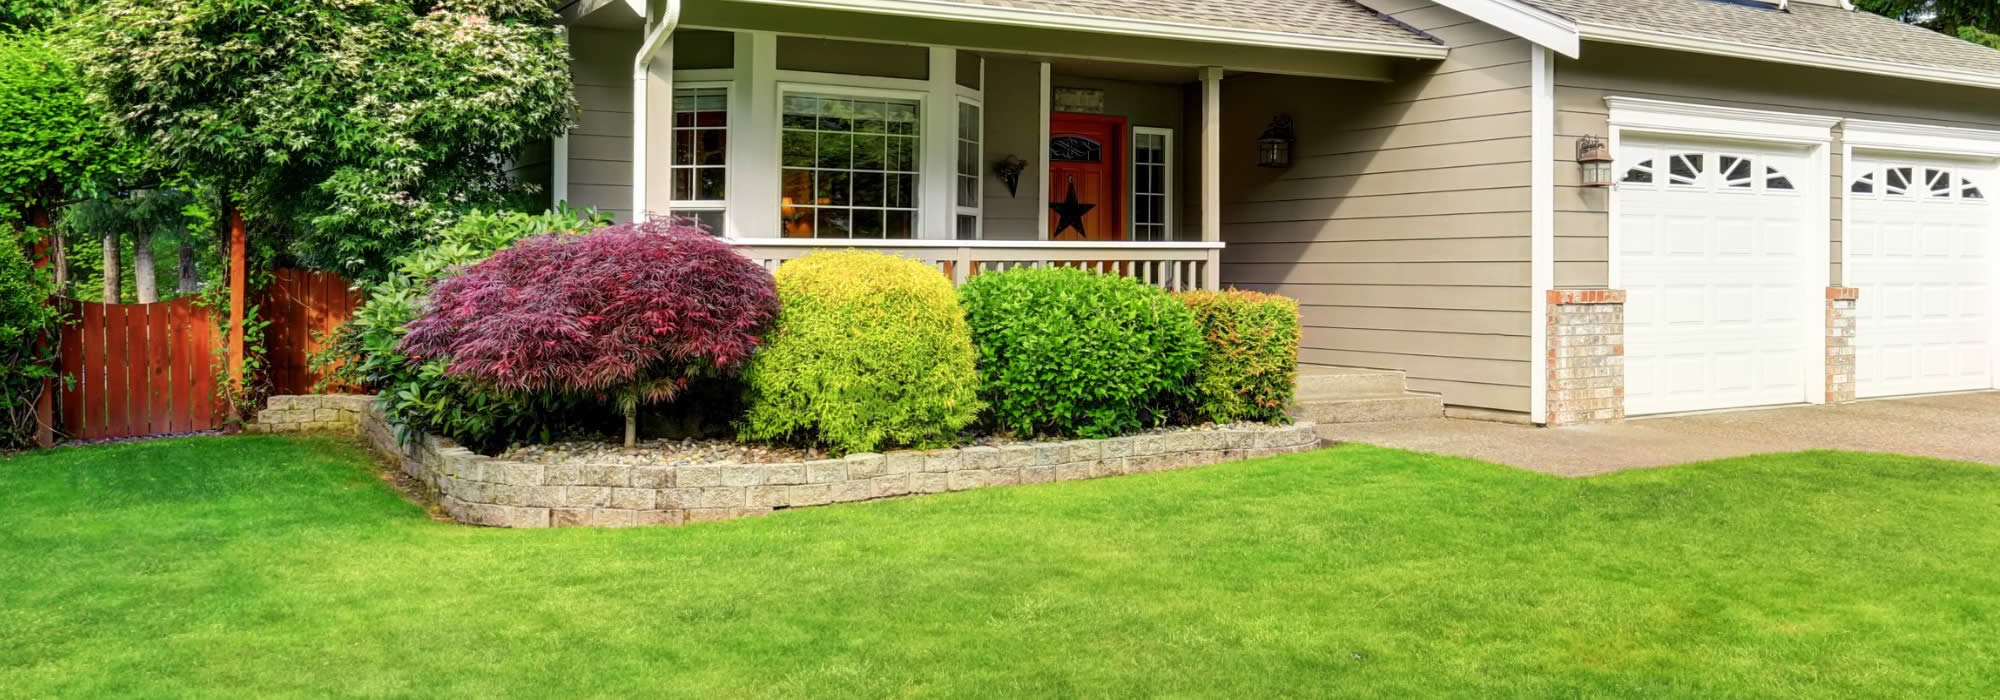 Landscaping Services in Maple Bluff